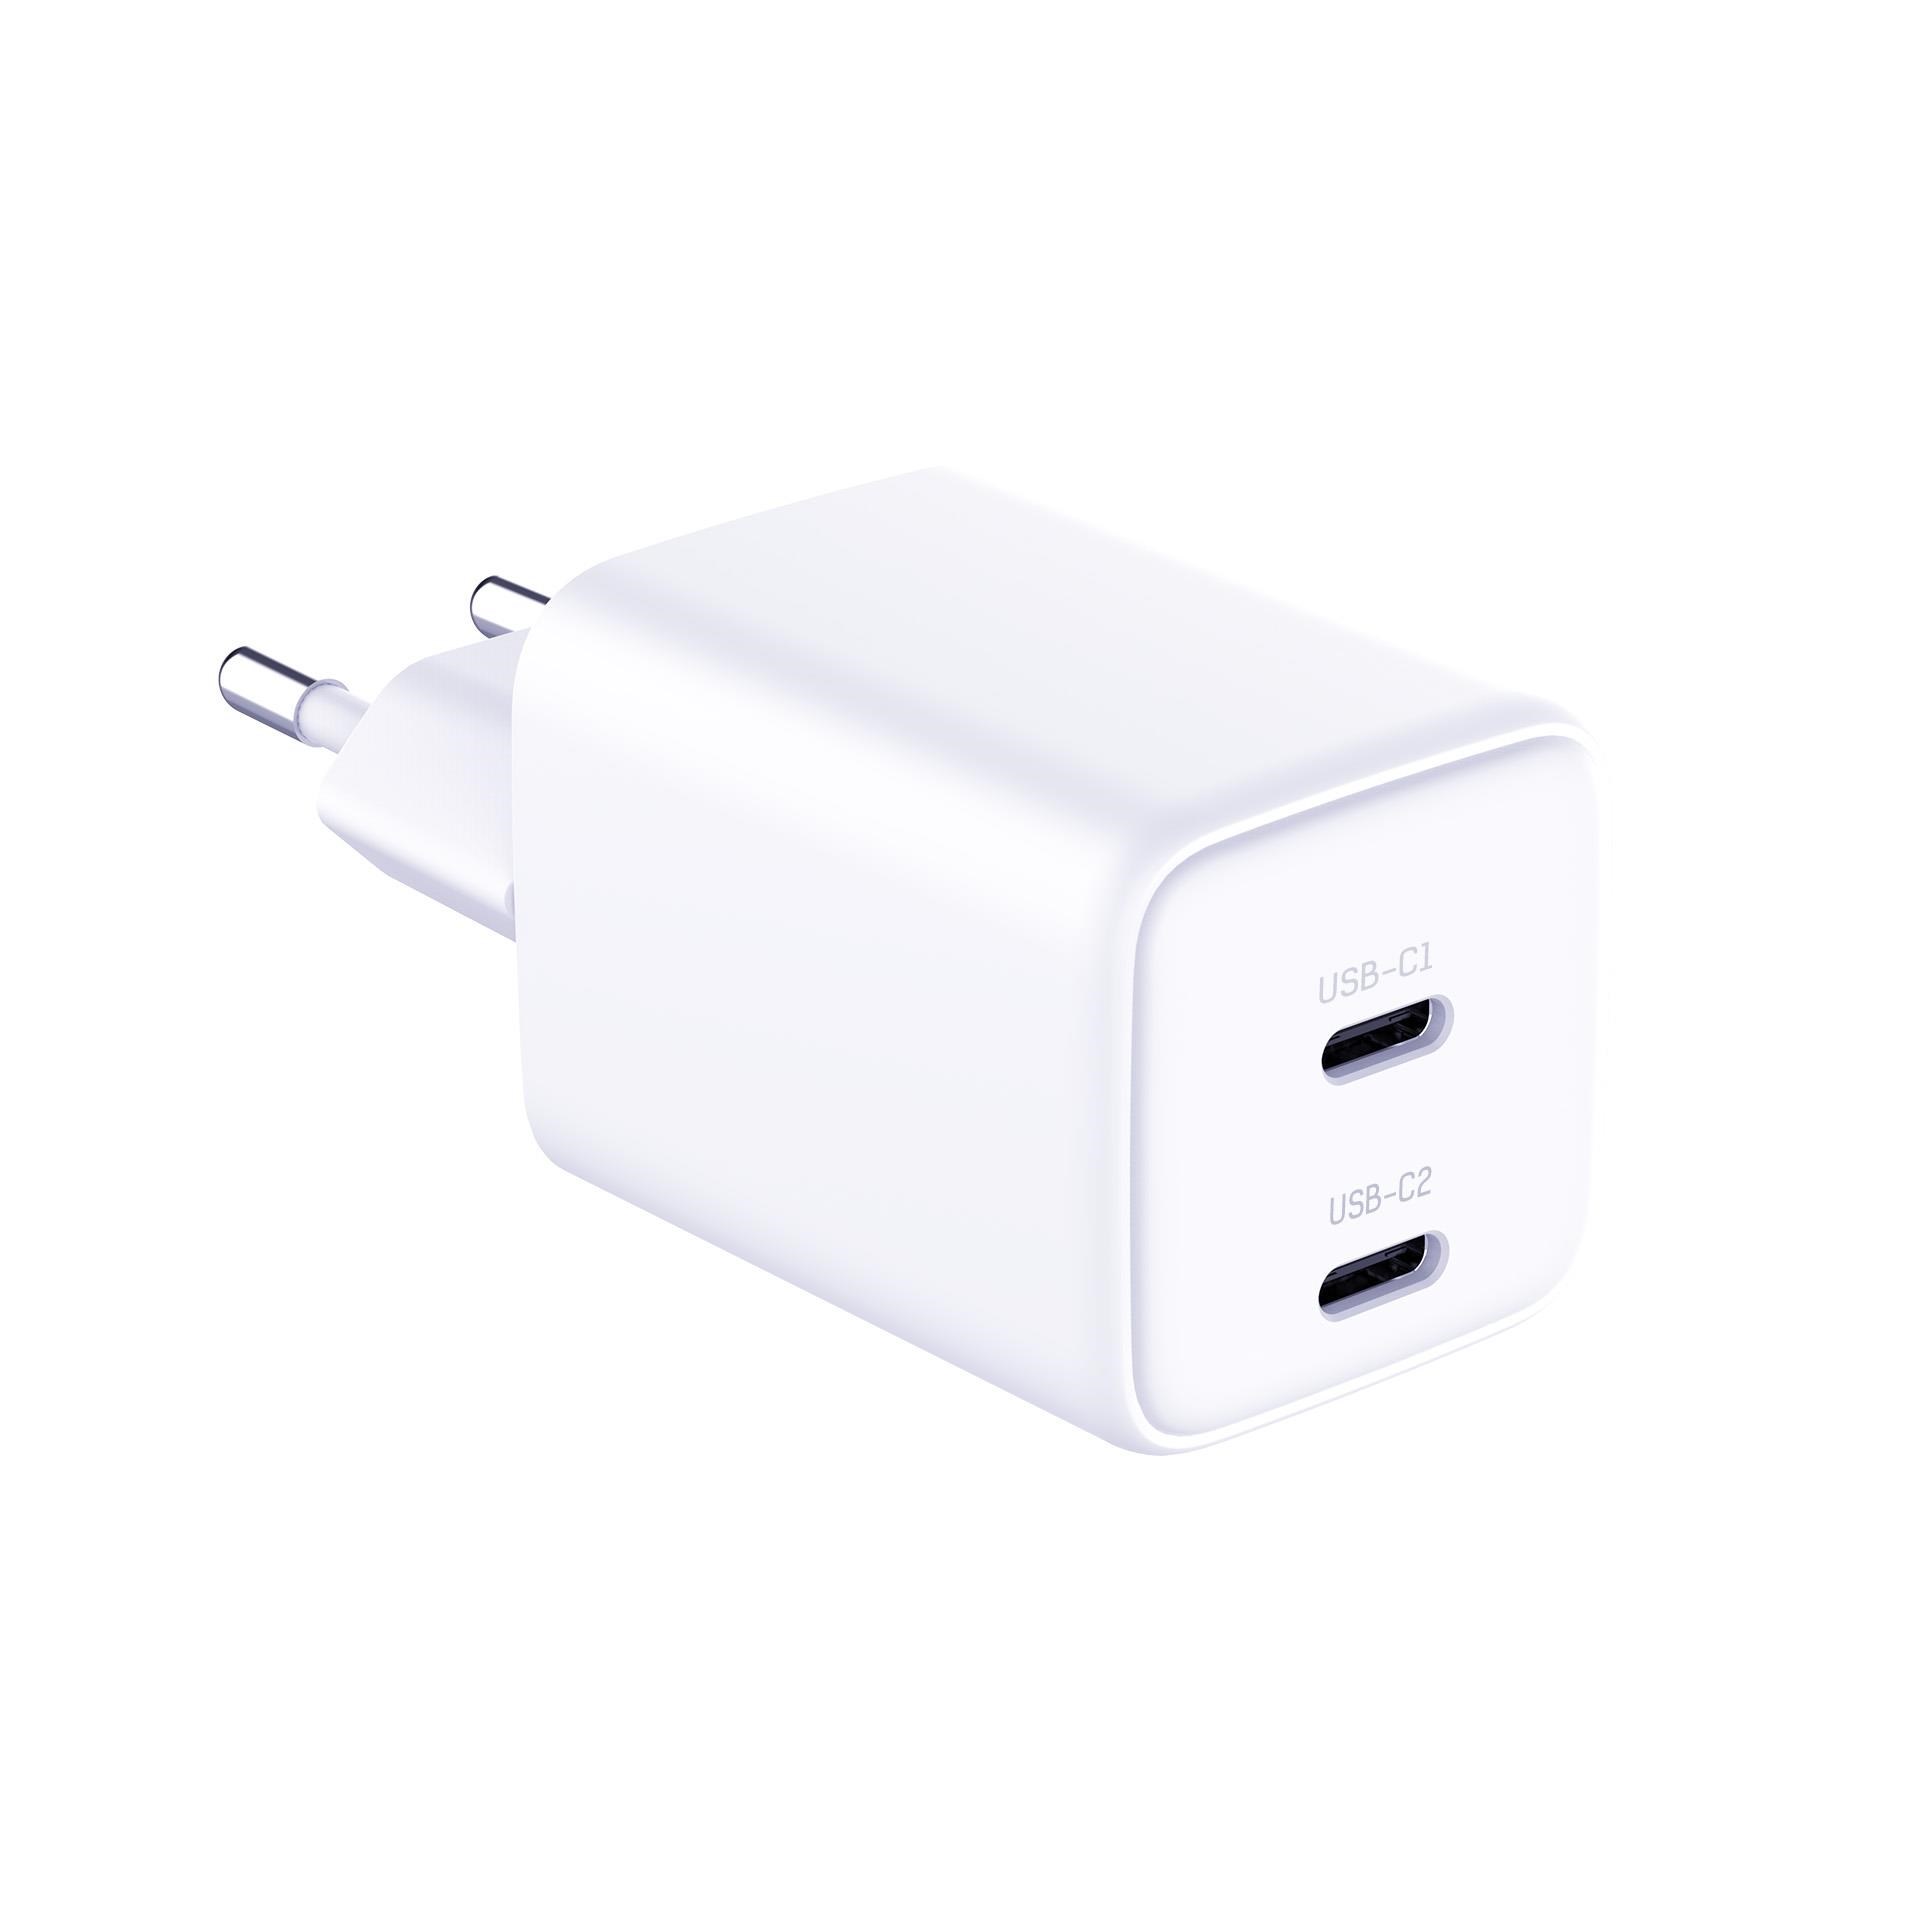 3mk Hyper Charger PD 45W+USB Cable C to C White1 